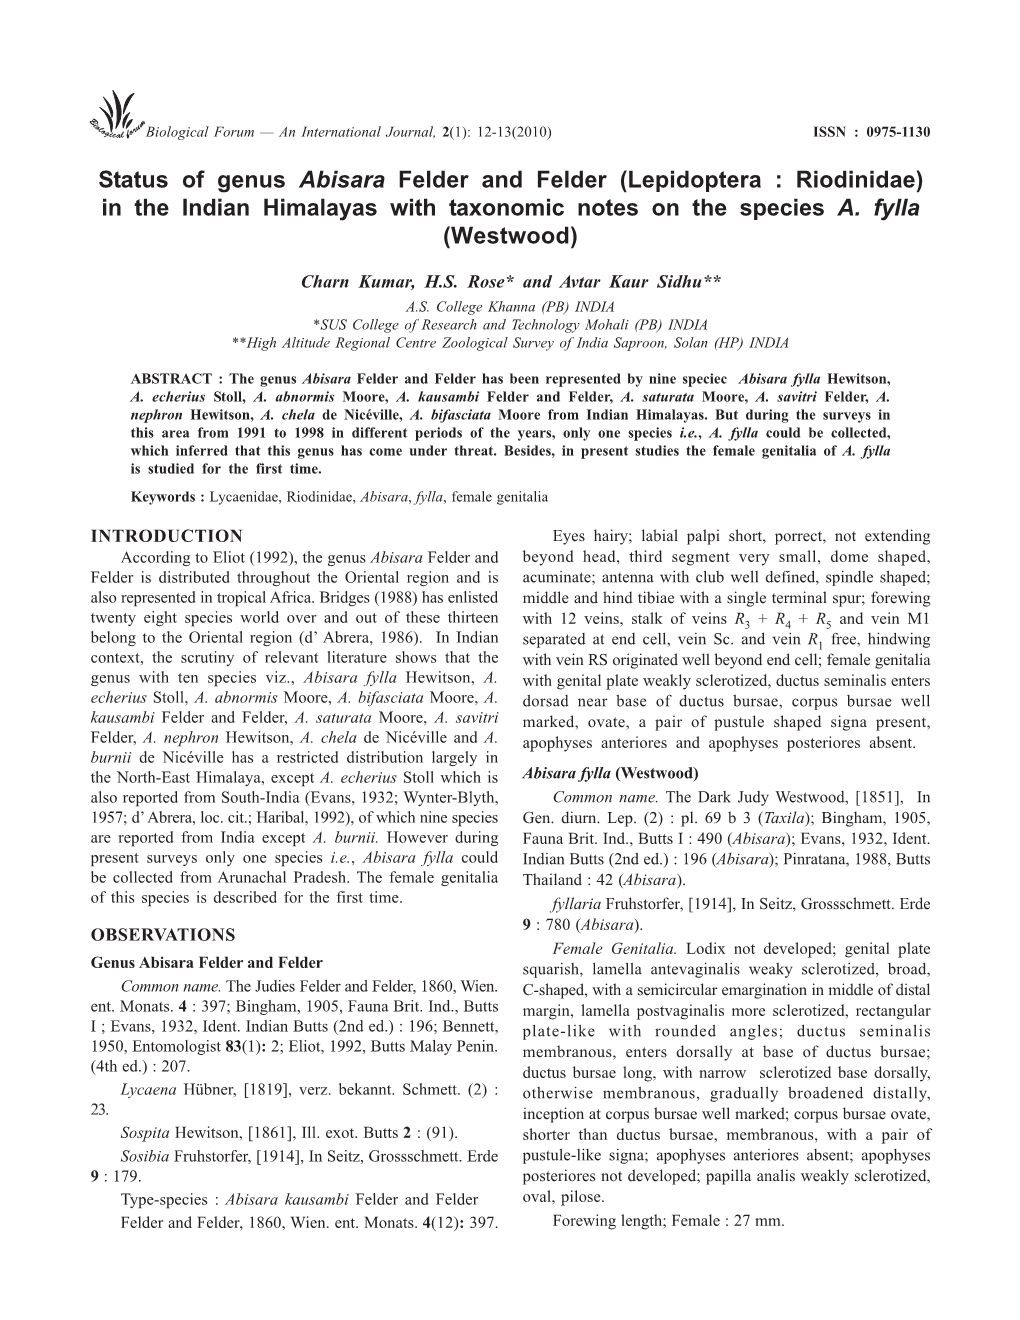 Status of Genus Abisara Felder and Felder (Lepidoptera : Riodinidae) in the Indian Himalayas with Taxonomic Notes on the Species A